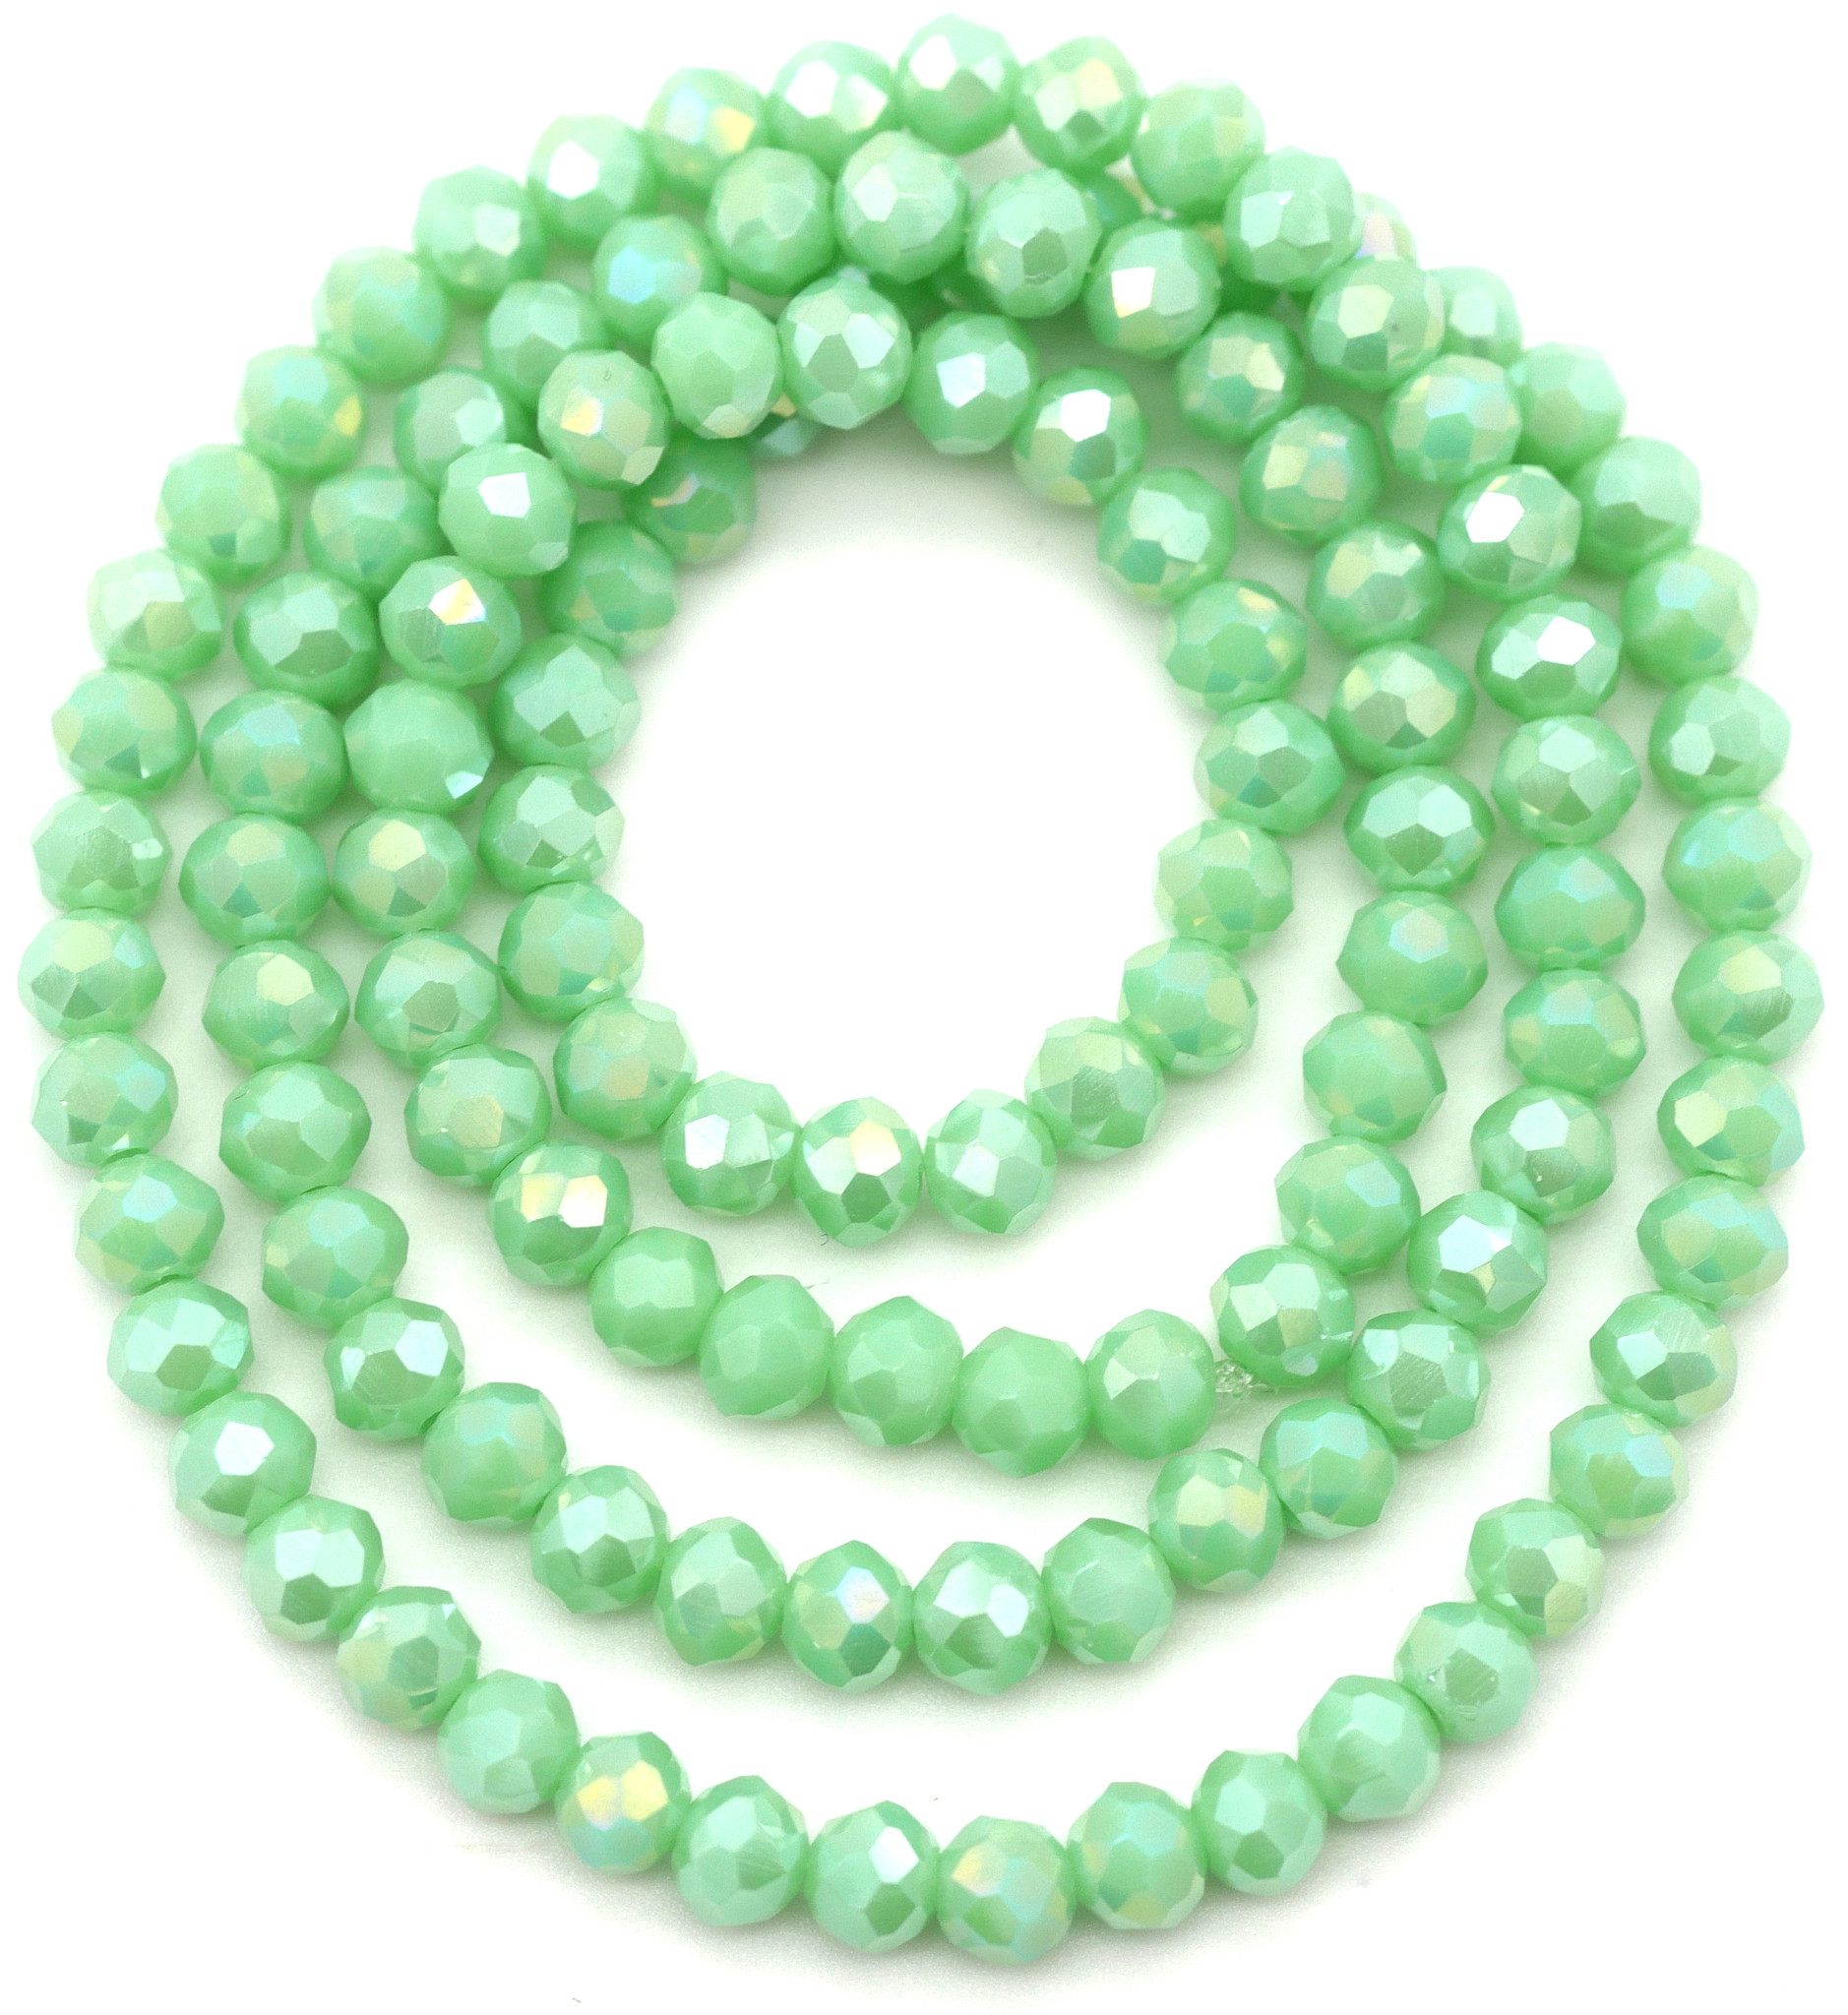 Approx. 16 Strand 4x3mm Crystal Faceted Rondelle Beads, Opaque Mint Green  AB